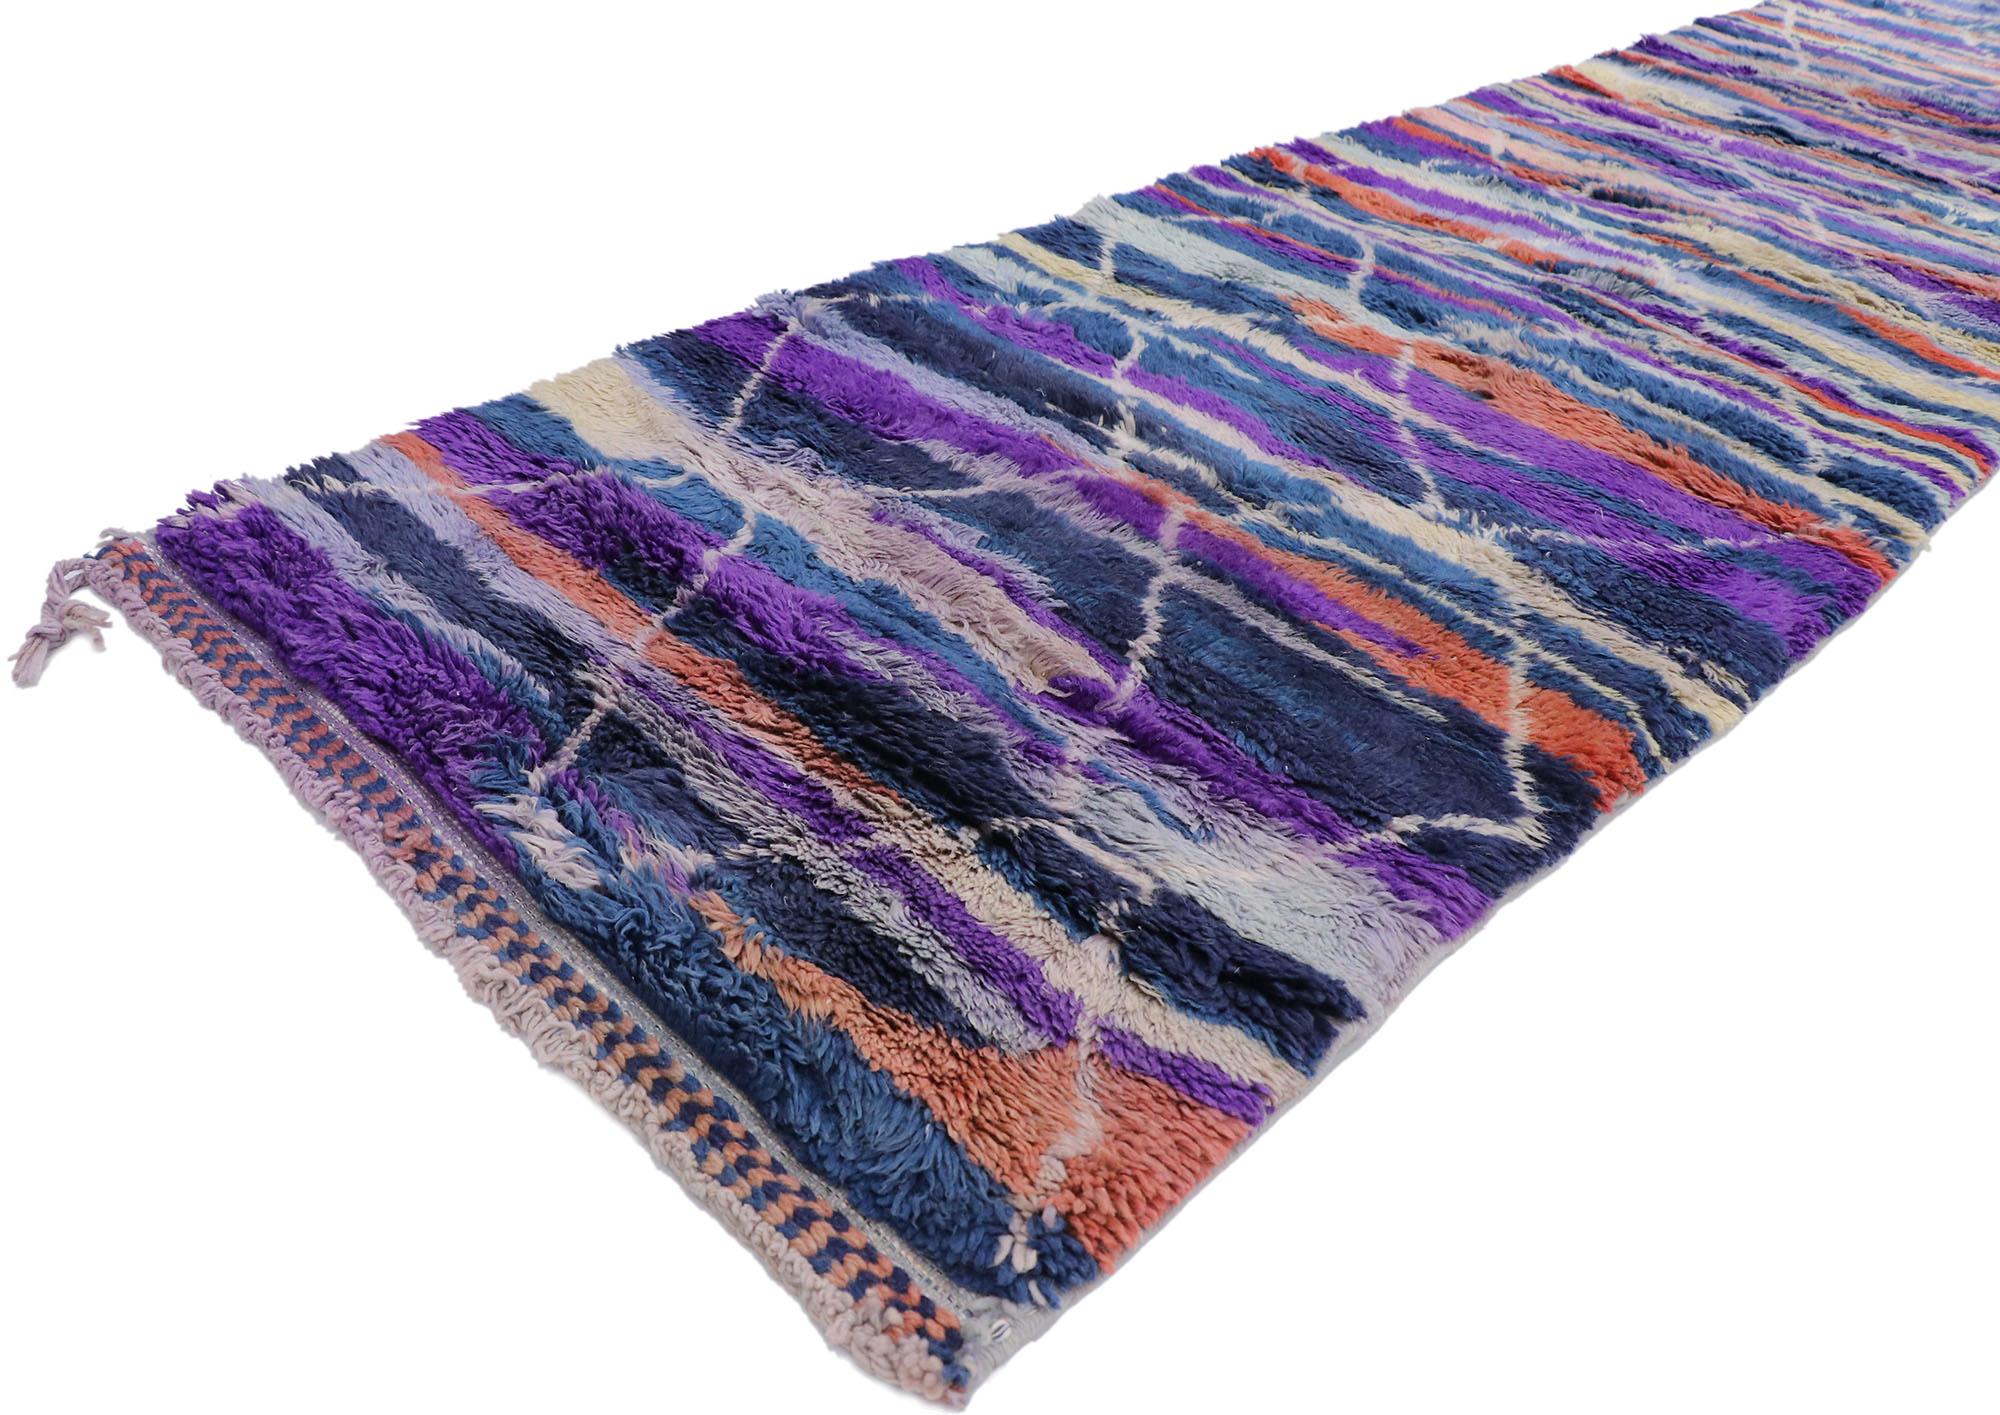 21094 new contemporary Berber Moroccan Runner inspired by Sol LeWitt 02'05 x 13'05. Showcasing a bold expressive design, incredible detail and texture, this hand knotted wool contemporary Berber Moroccan runner is a captivating vision of woven